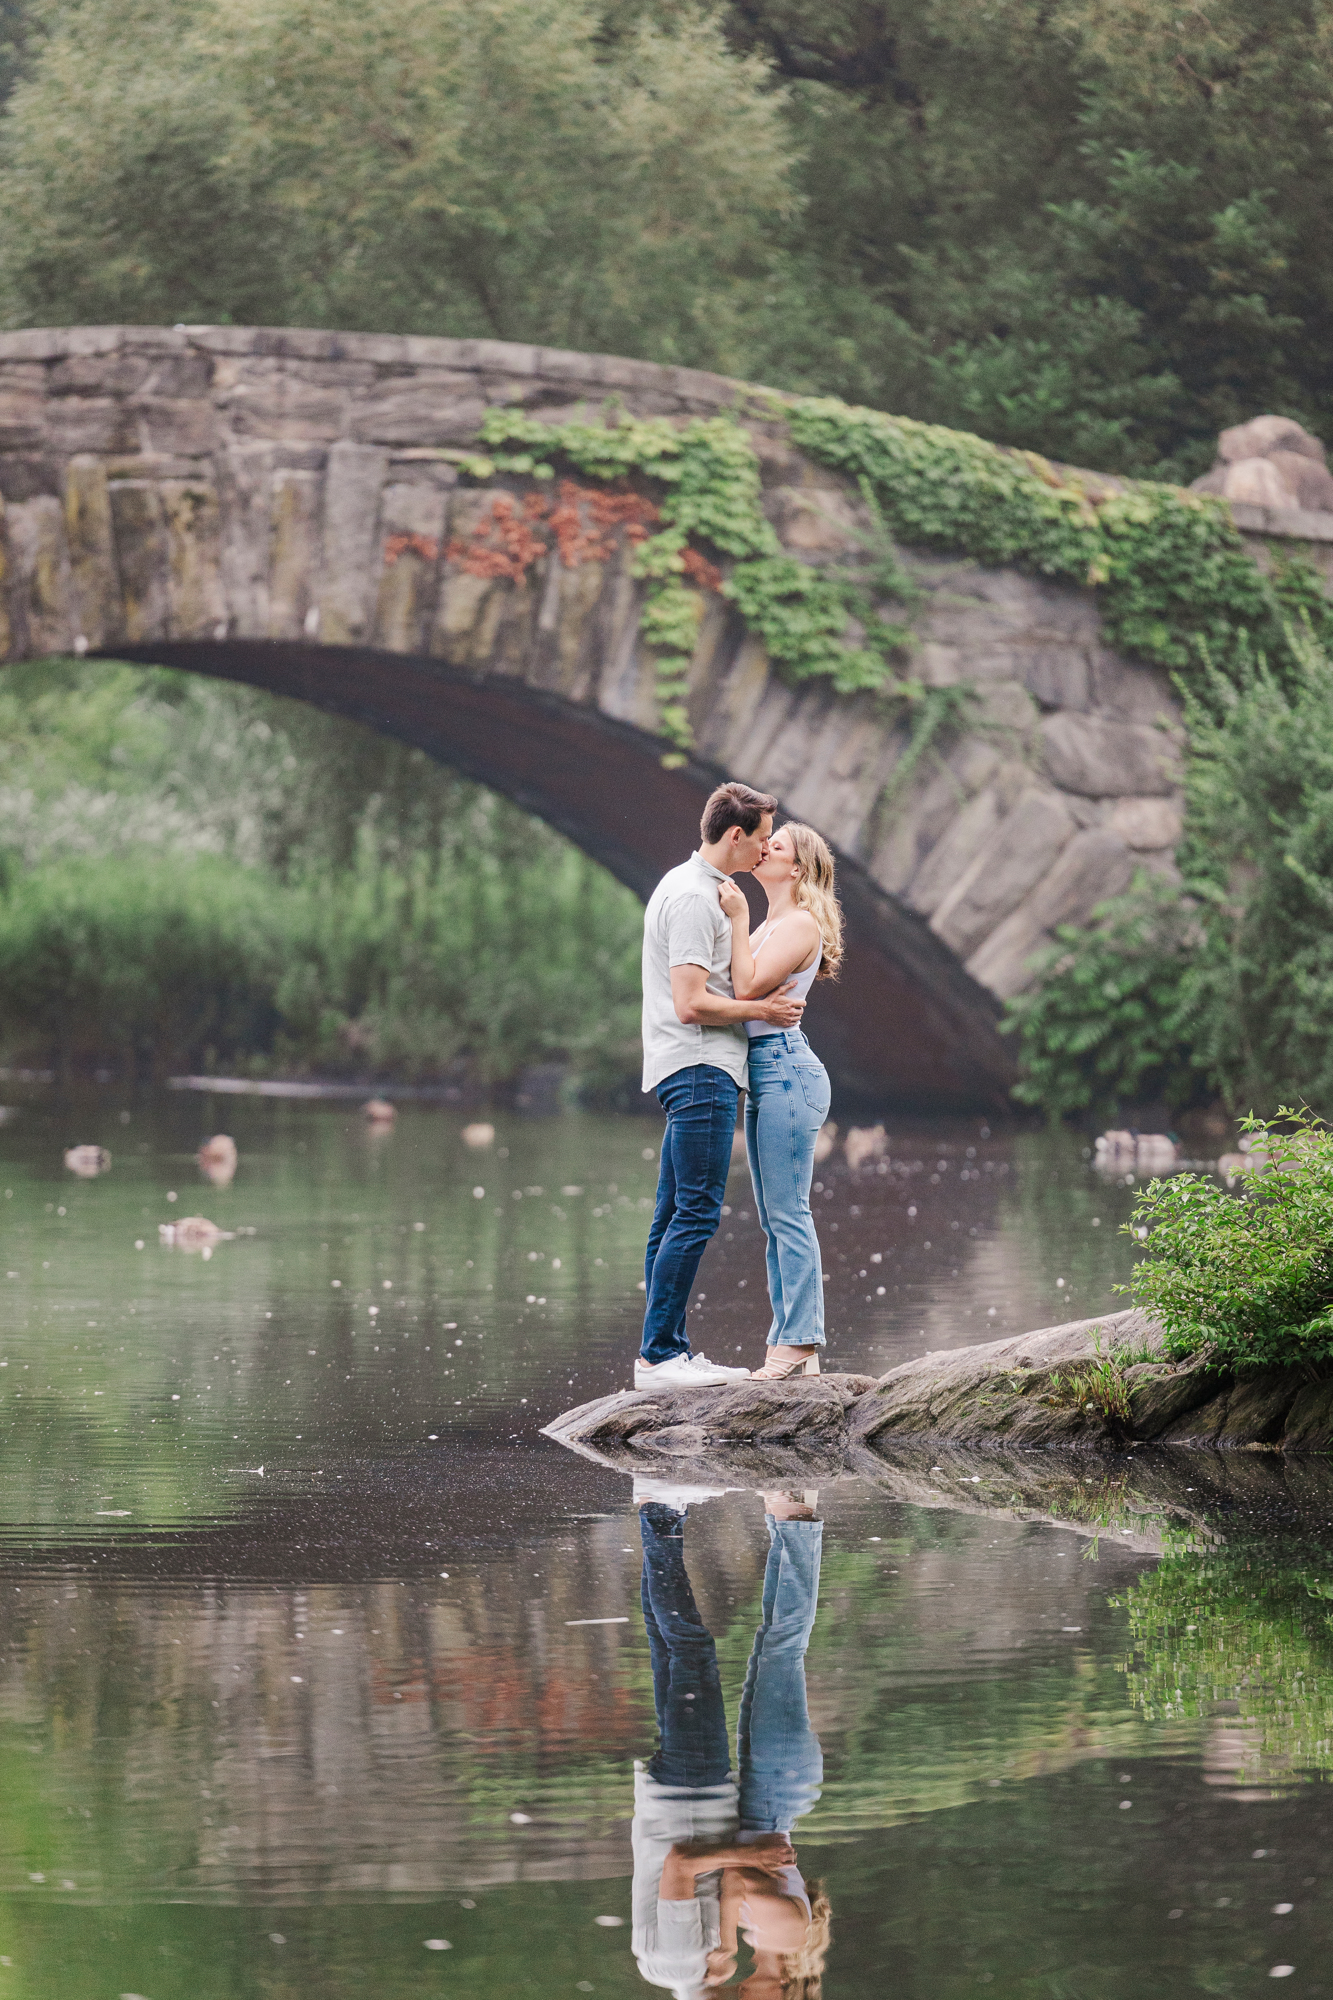 Vibrant Engagement Session in Central Park